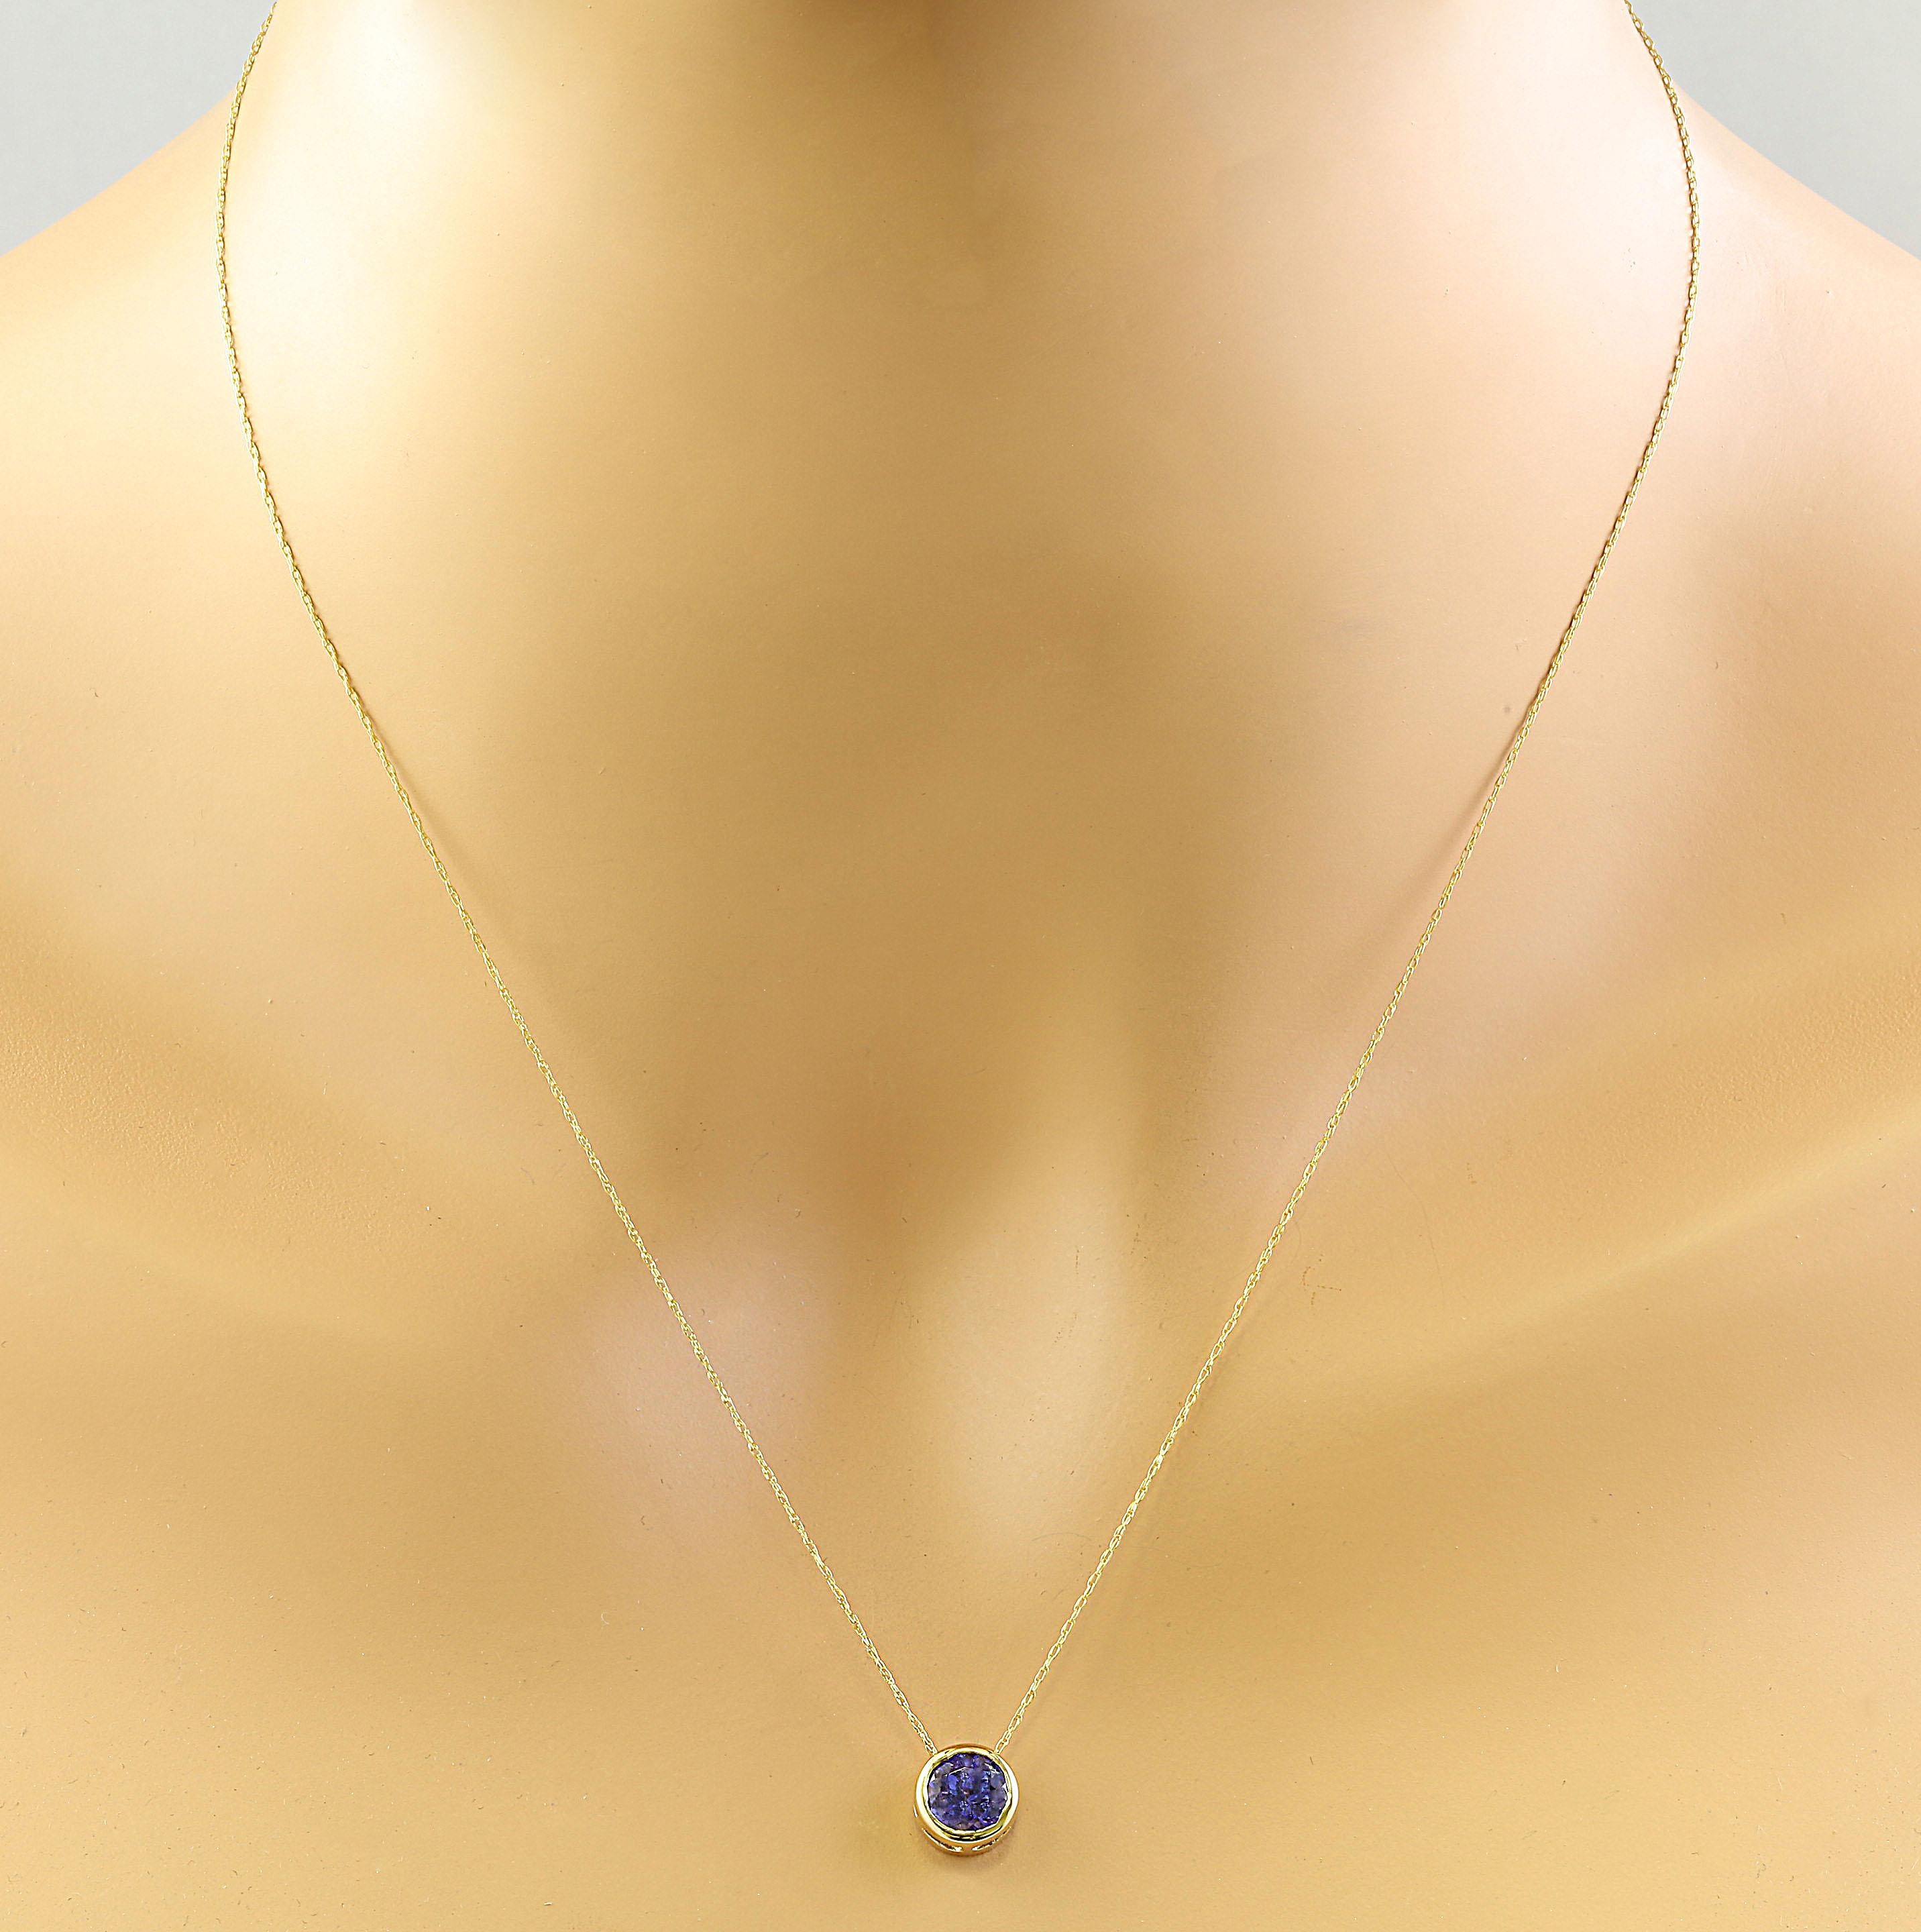 1.50 Carat Tanzanite 14K Yellow Gold Necklace
Stamped: 14K
Total Necklace Weight: 1.4 Grams
Length: 18 Inches
Tanzanite Weight: 1.50 Carat (6.50x6.50 Millimeters)
Face Measures: 8.20x8.20 Millimeter 
SKU: [600188]